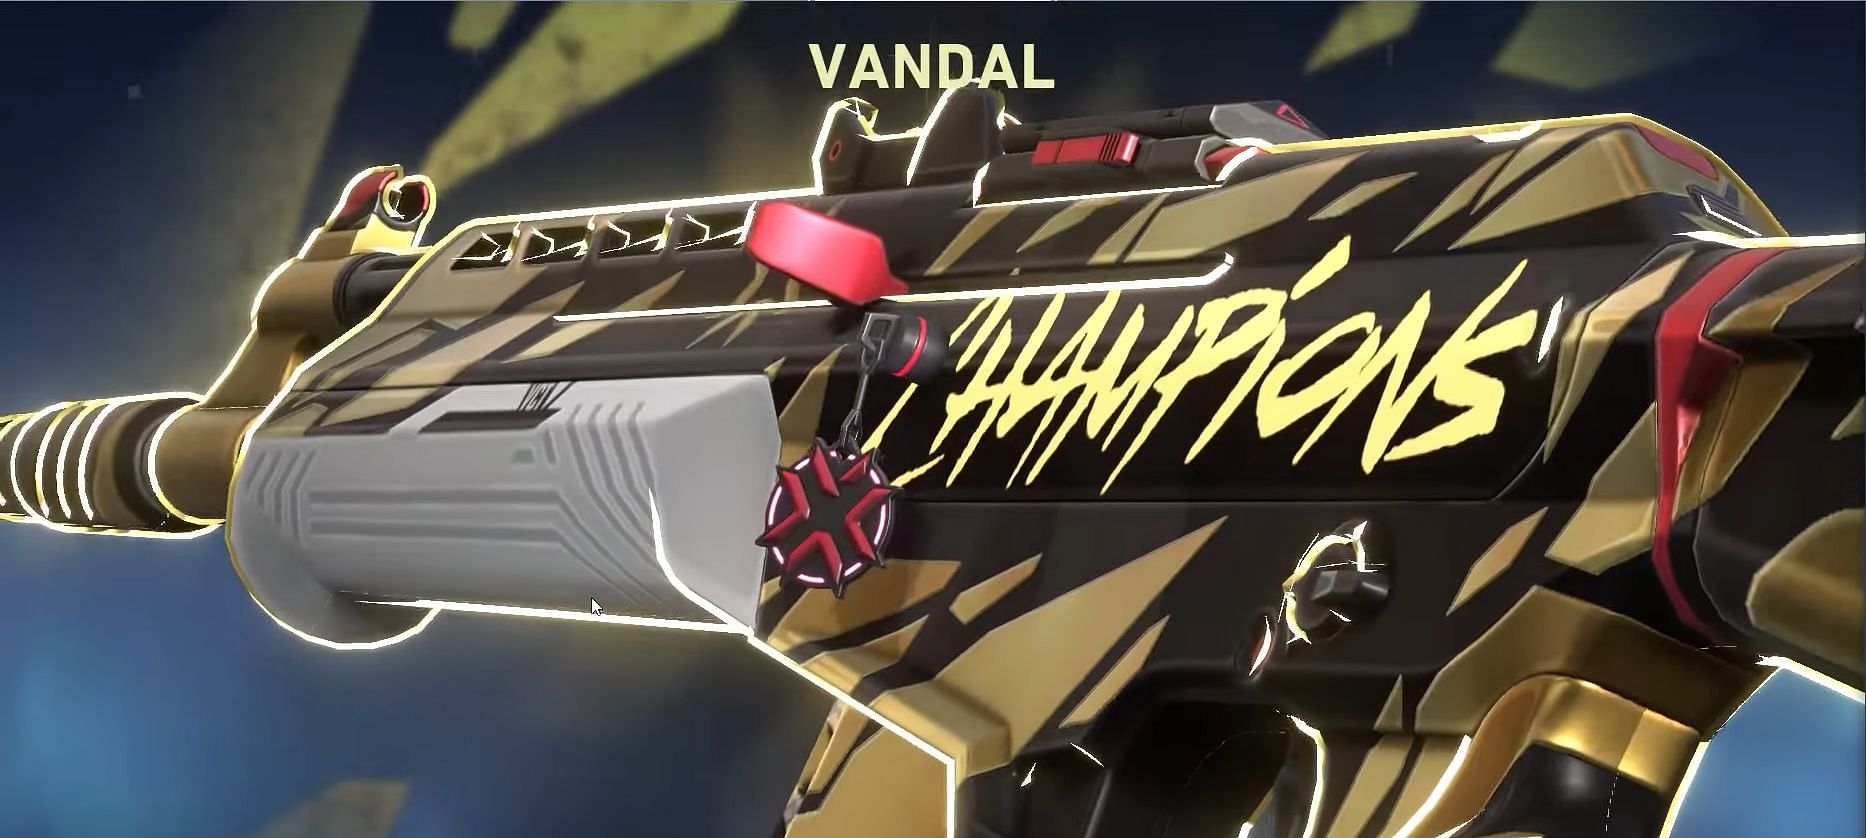 Vandal Skin in Champions 2021 Collection (Image via Riot Games)